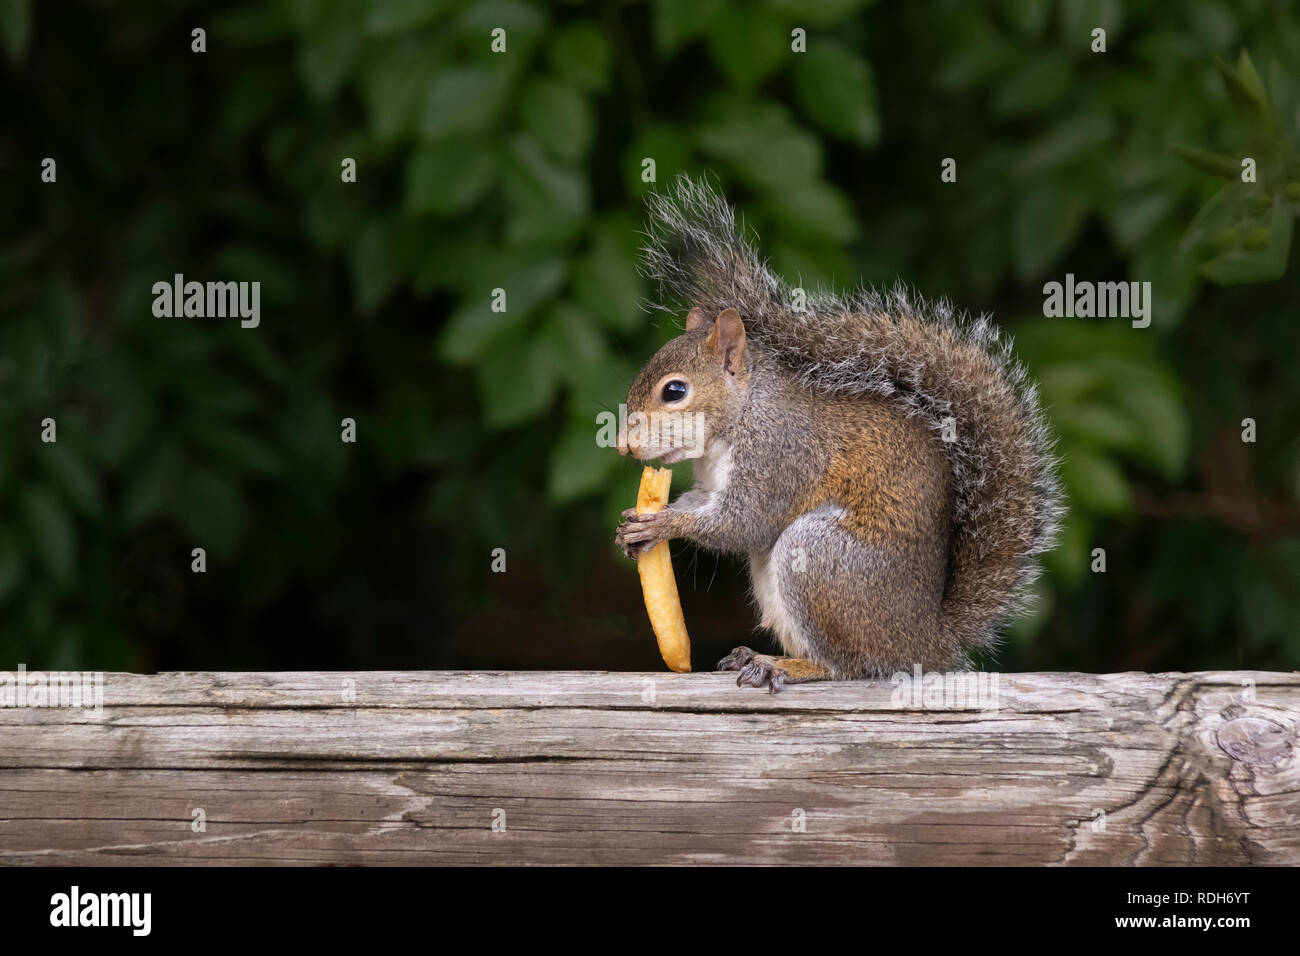 A squirrel stands on a deck rail calmly eating a fry. Tail wrapped up eyes focused forward with profile facing enjoying a found french fries. Stock Photo